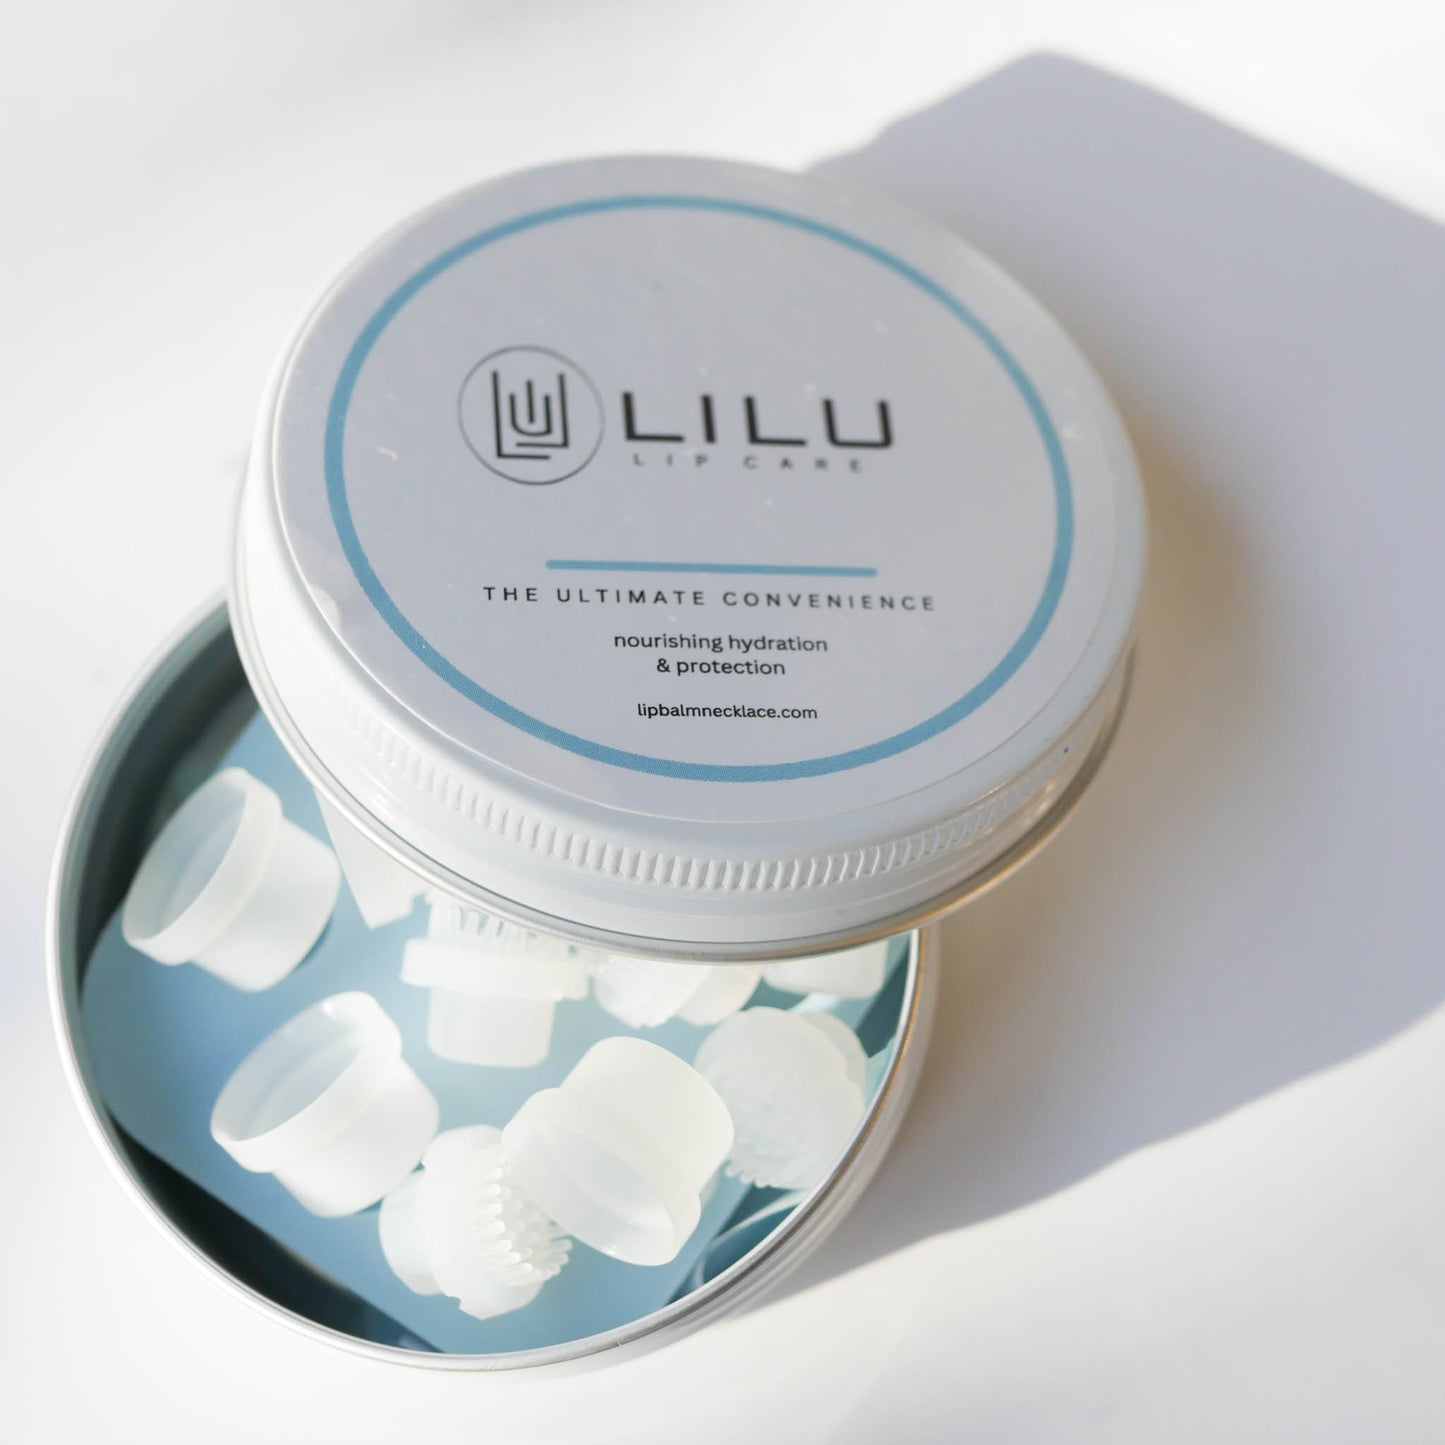 LiLu Lip Balm Necklace Cosette Silver Plated with 8 Lip Balm Refills or DIY Refills - Use Your Balm